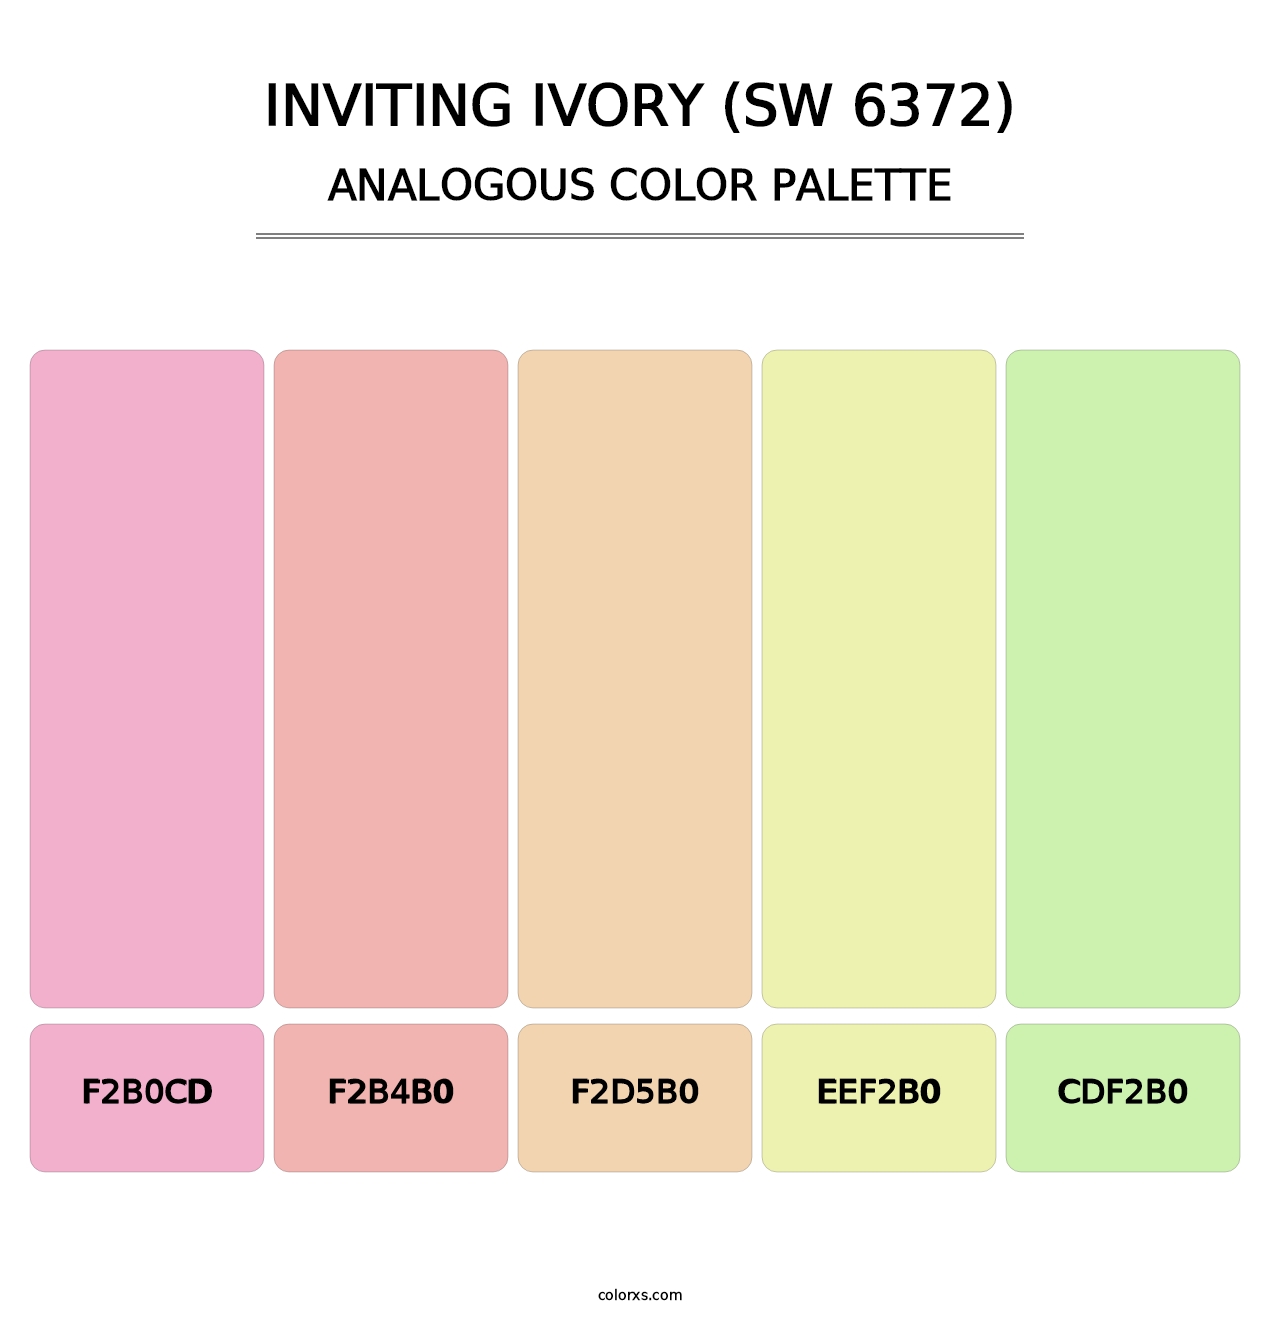 Inviting Ivory (SW 6372) - Analogous Color Palette